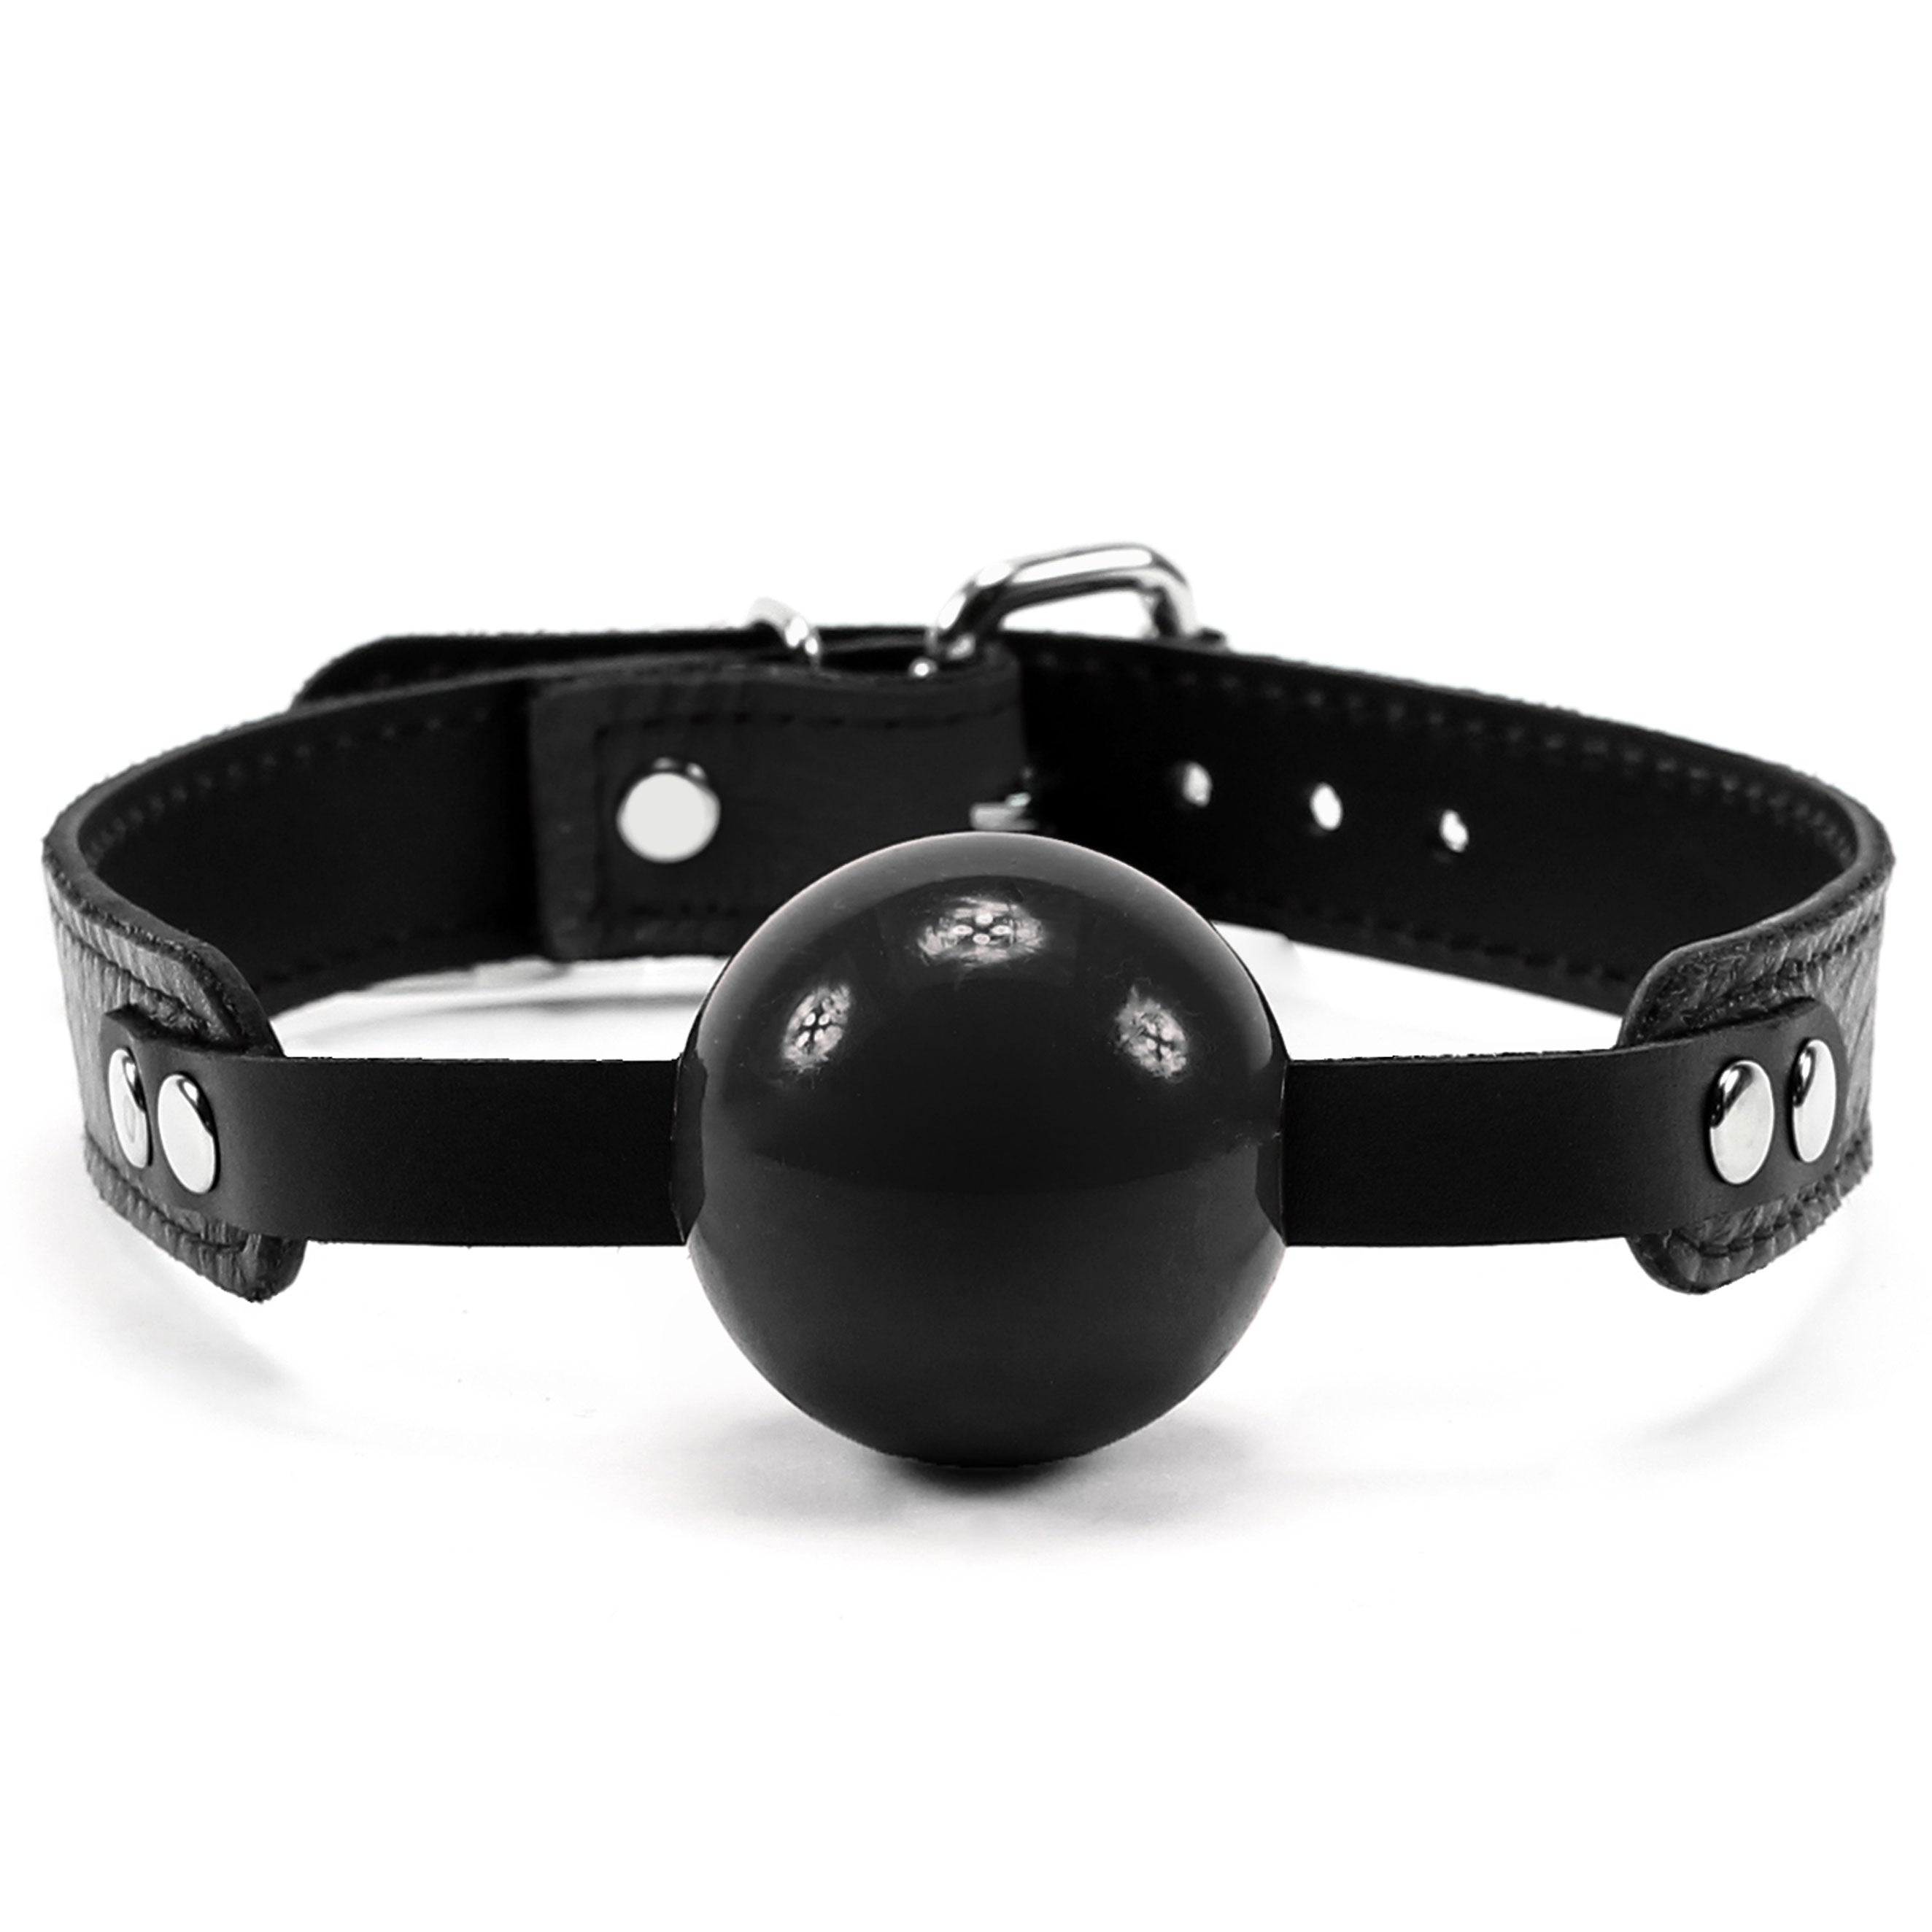 Berlin BDSM Ball Gag Red Leather Strap Black Silicone Ball